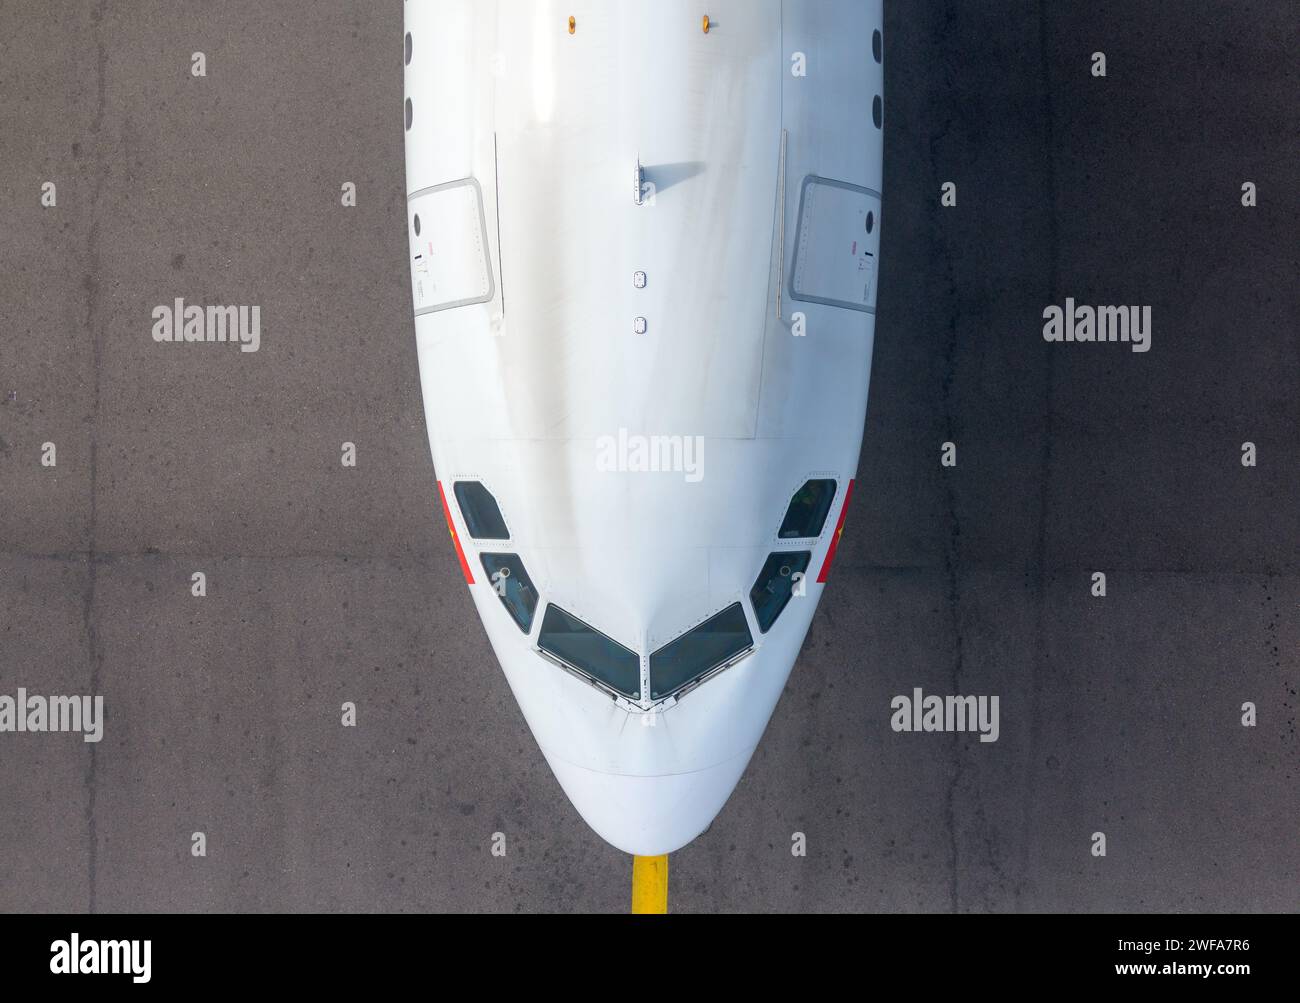 Top down view of Airbus aircraft taxiing underneath Hong Kong Airport Sky Bridge, also know as Chek Lap Kok Sky Deck, above a taxiway. Stock Photo